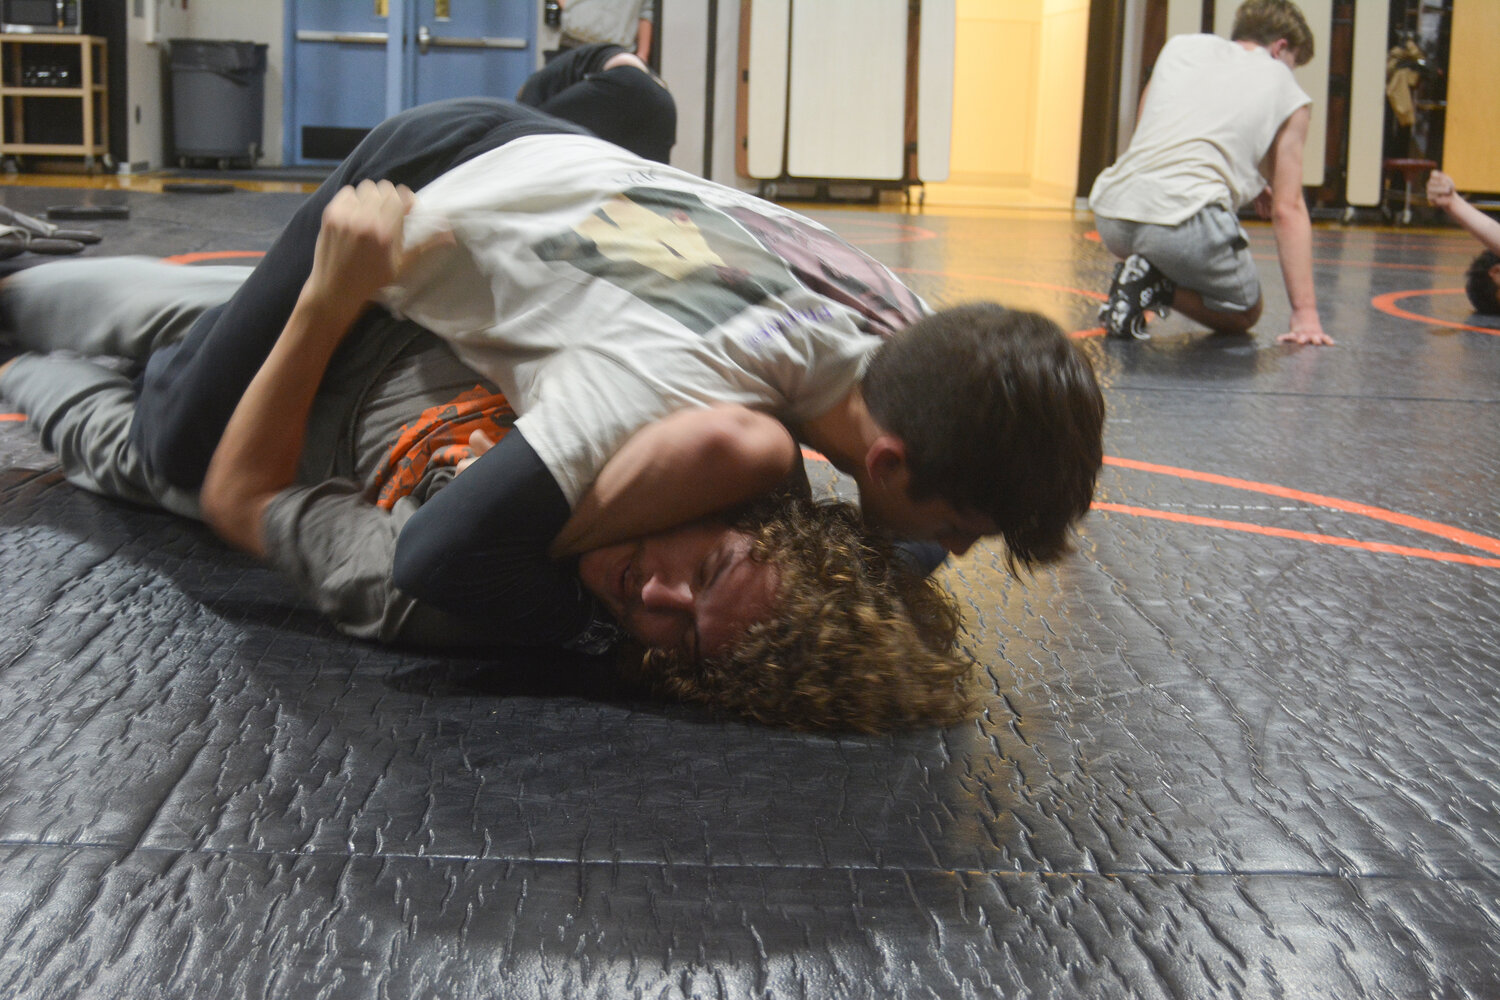 Zander Peck pins down Connor Power during practice on Nov. 30.